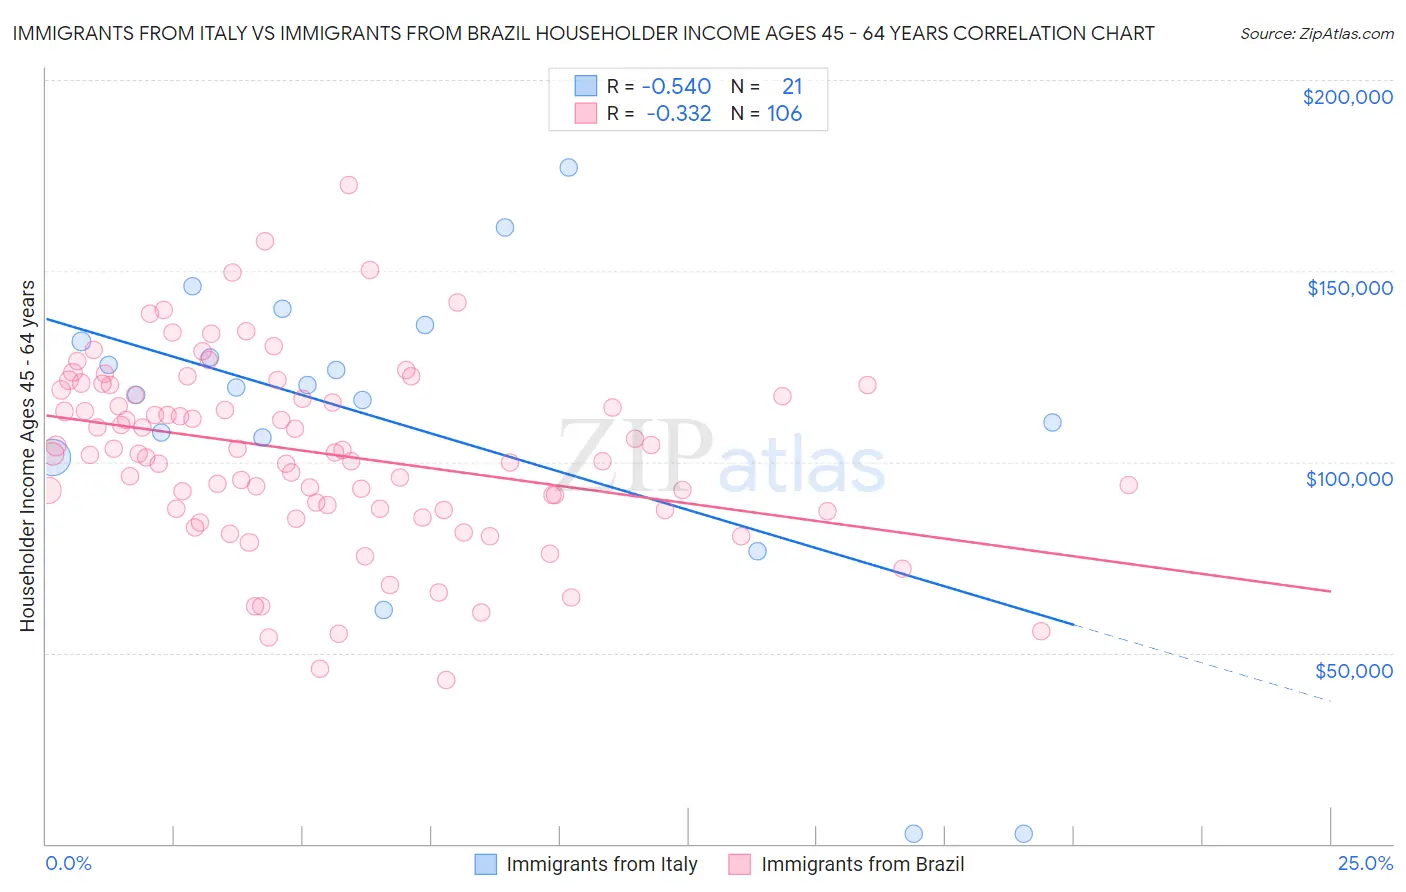 Immigrants from Italy vs Immigrants from Brazil Householder Income Ages 45 - 64 years